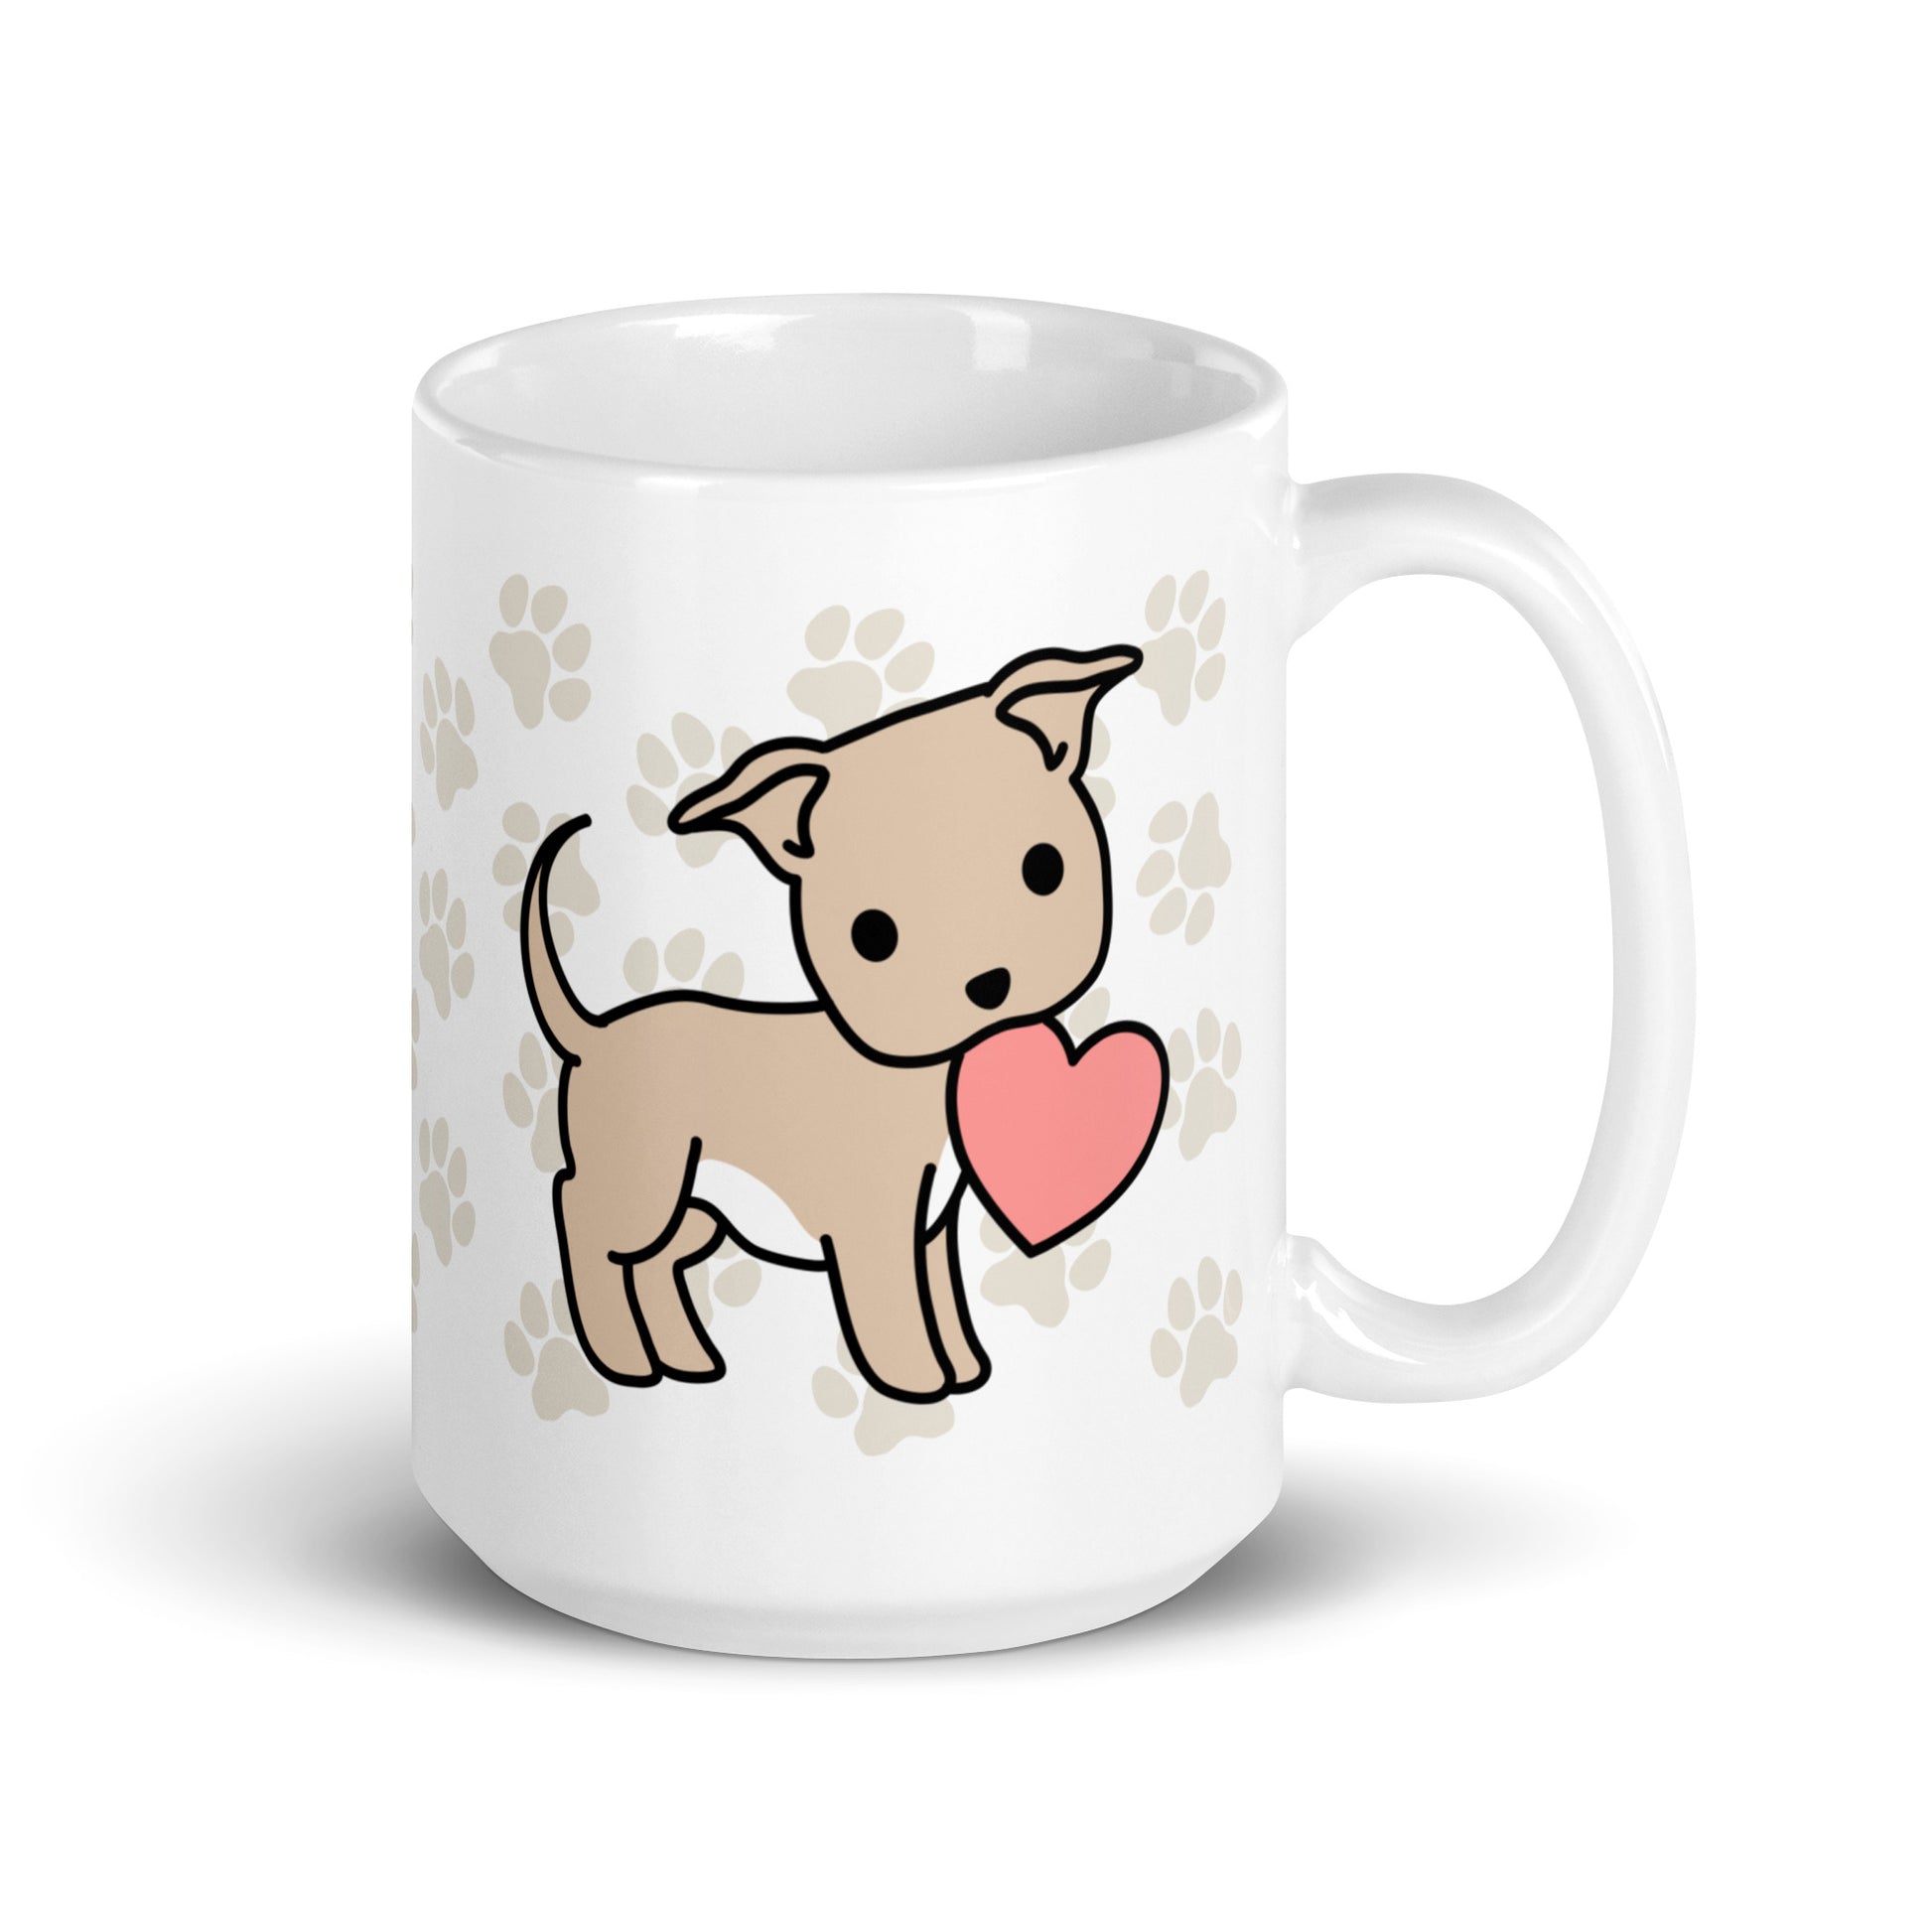 A white 15 ounce ceramic mug with a pattern of light brown pawprints all over. The mug also features a stylized illustration of a Pitbull holding a heart in its mouth.